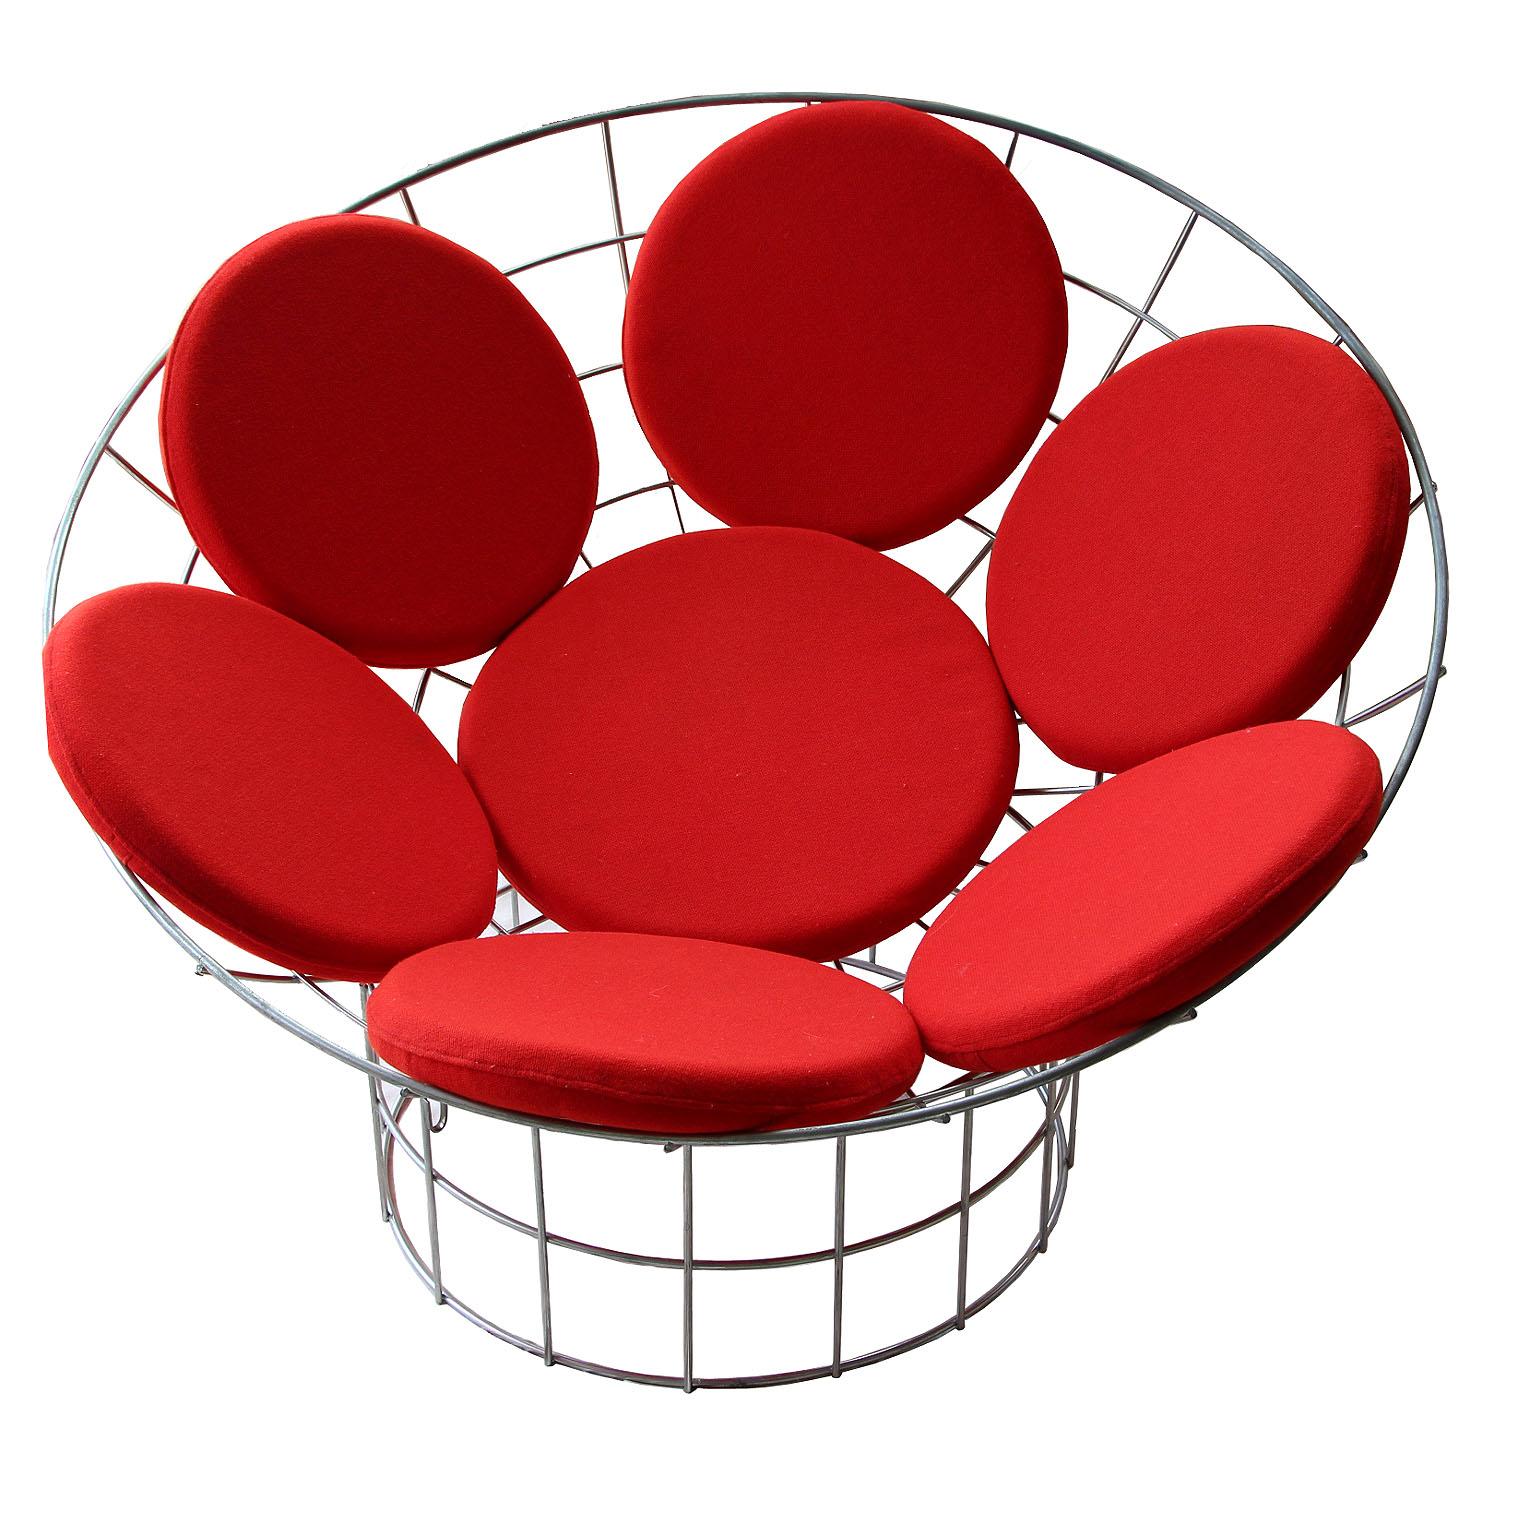 The original Peacock chair is very unique and visually amazing!, assembled with clips. The structure has two metal pieces, one in a bowl shaped and a cylindrical base made of galvanised stainless steel. The seat has seven removable red seat cushions